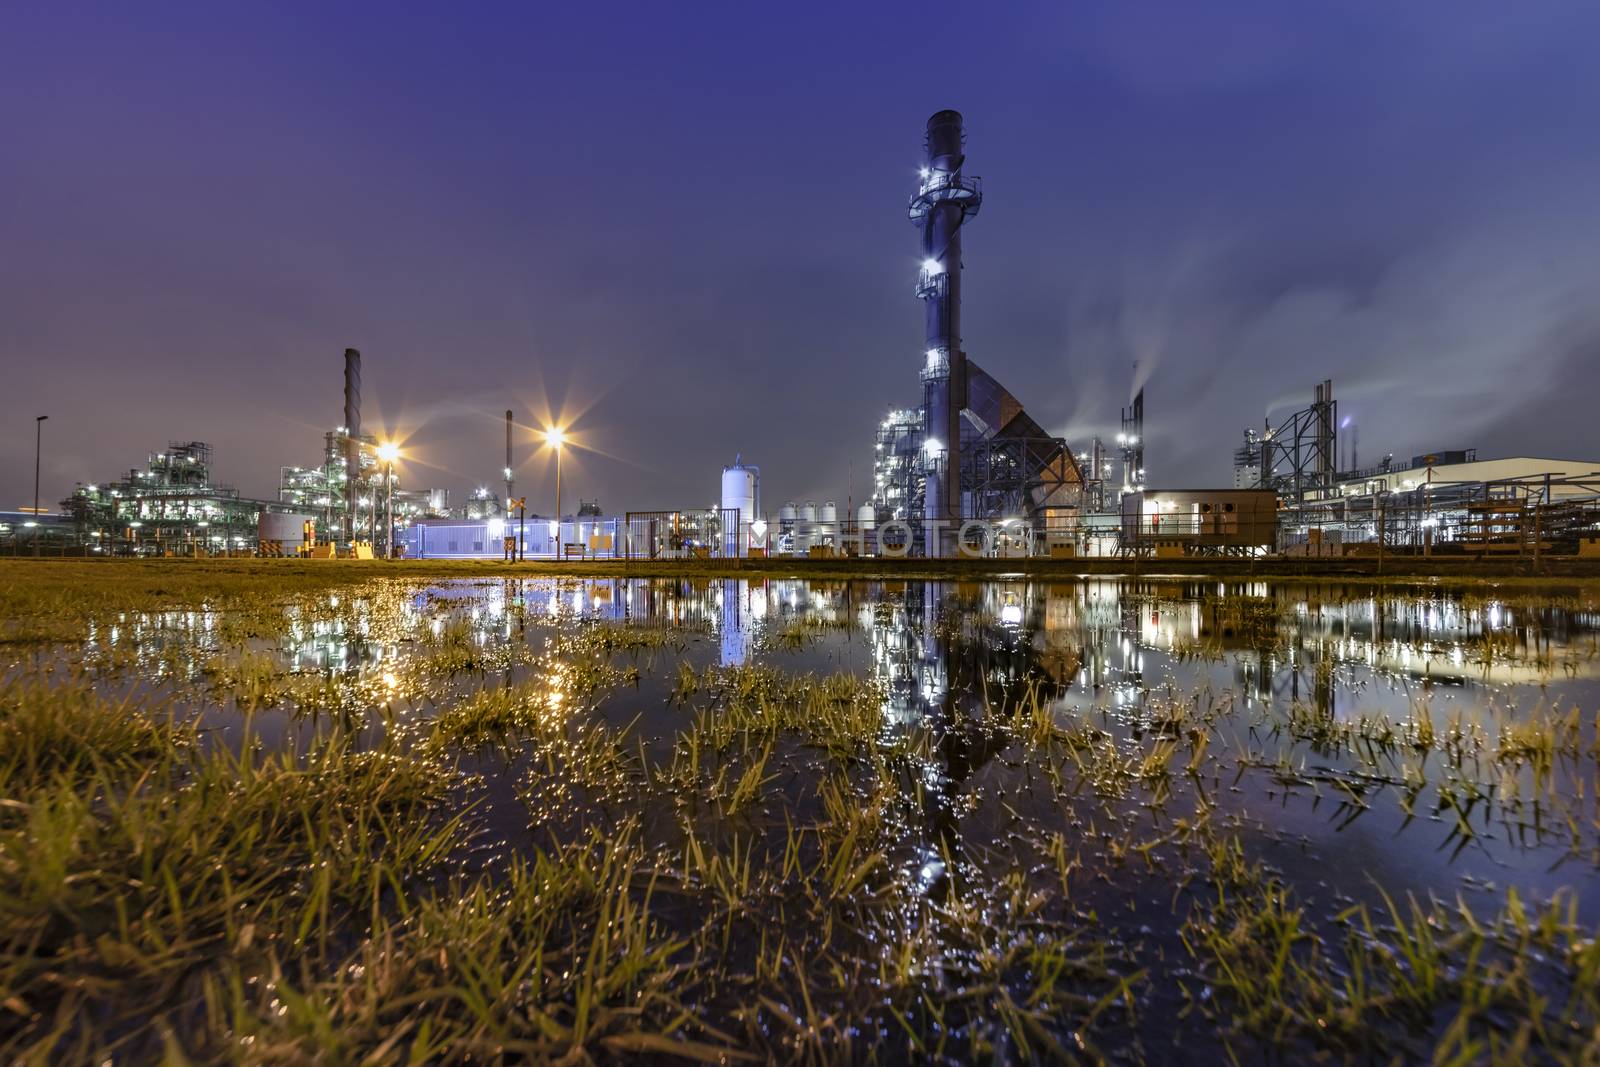 Reflection of the panorama of a refinery and its chimney during the sunset blue hour moment at Rotterdam, Netherlands